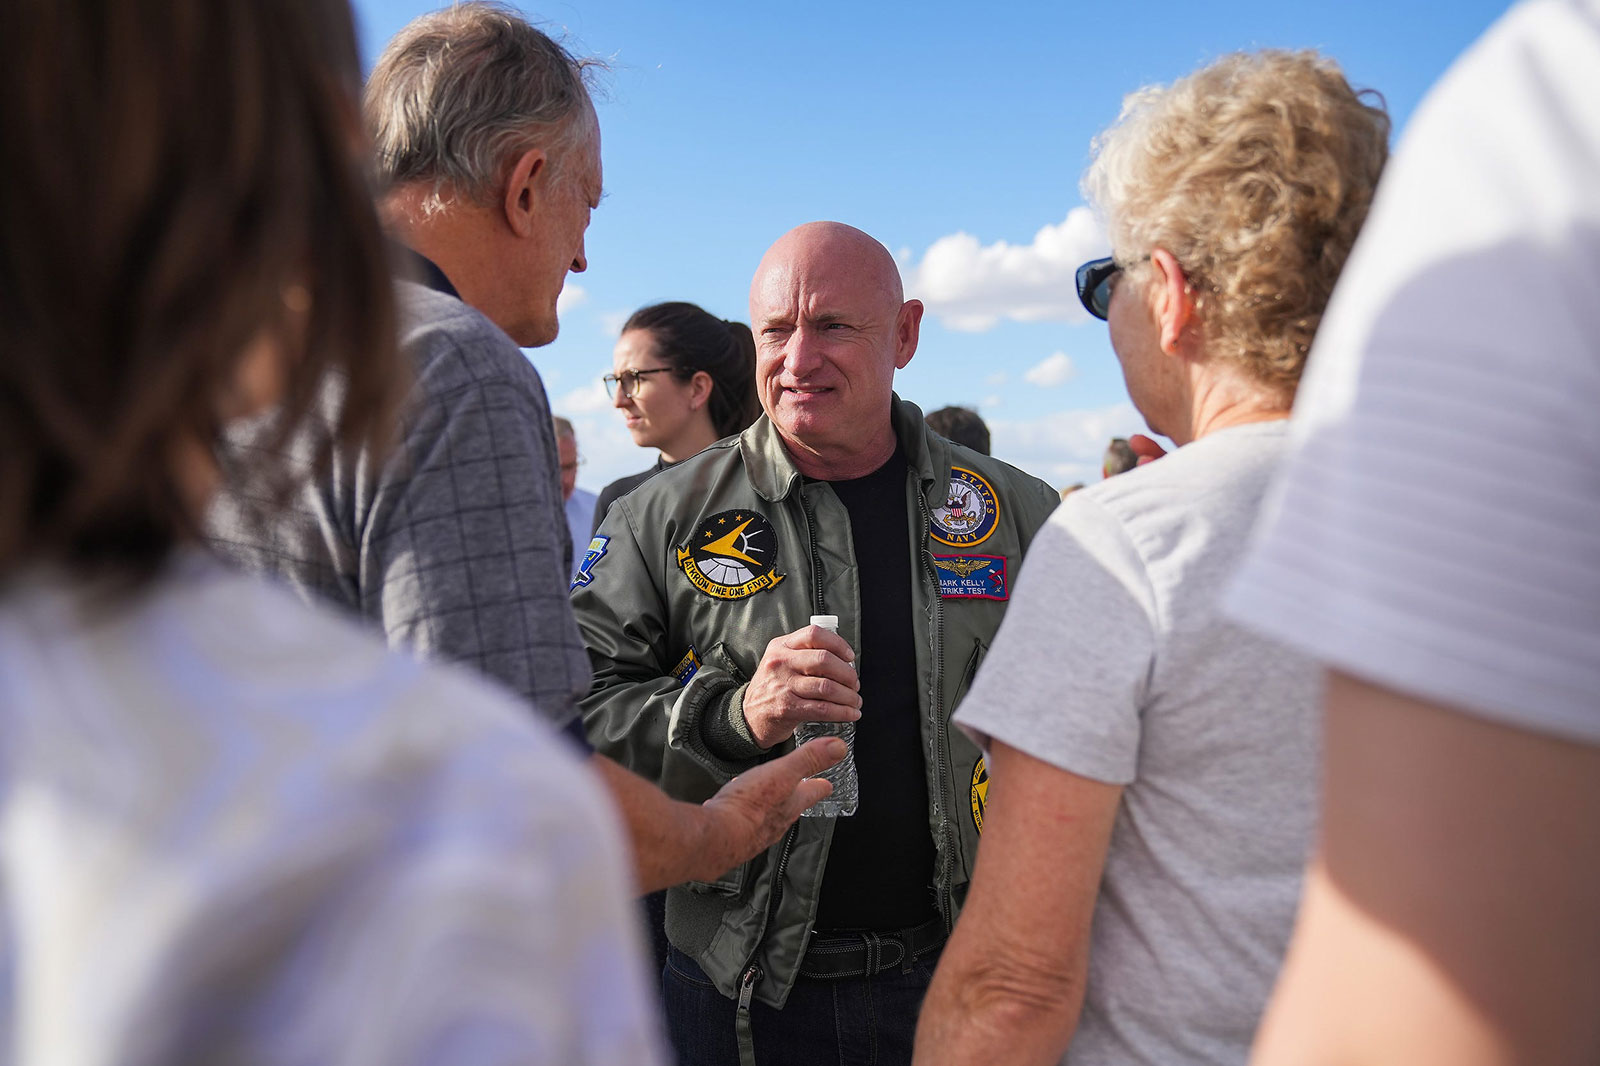 Arizona Democratic Sen. Mark Kelly speaks with constituents during a campaign event in Mesa, Arizona, on Oct. 23. The Arizona Senate race is among the most competitive in the country.